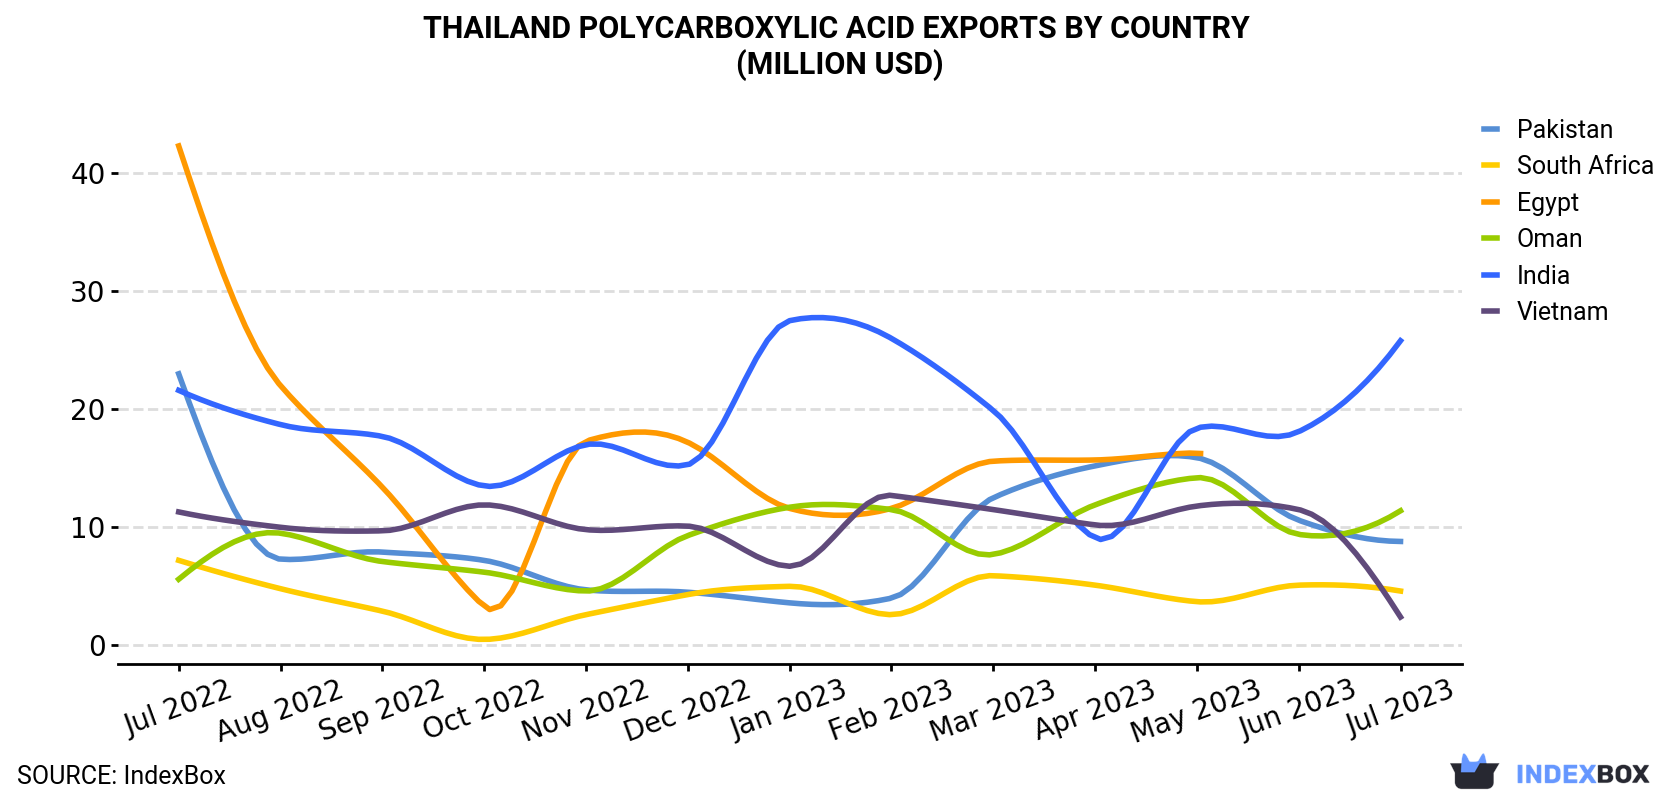 Thailand Polycarboxylic Acid Exports By Country (Million USD)